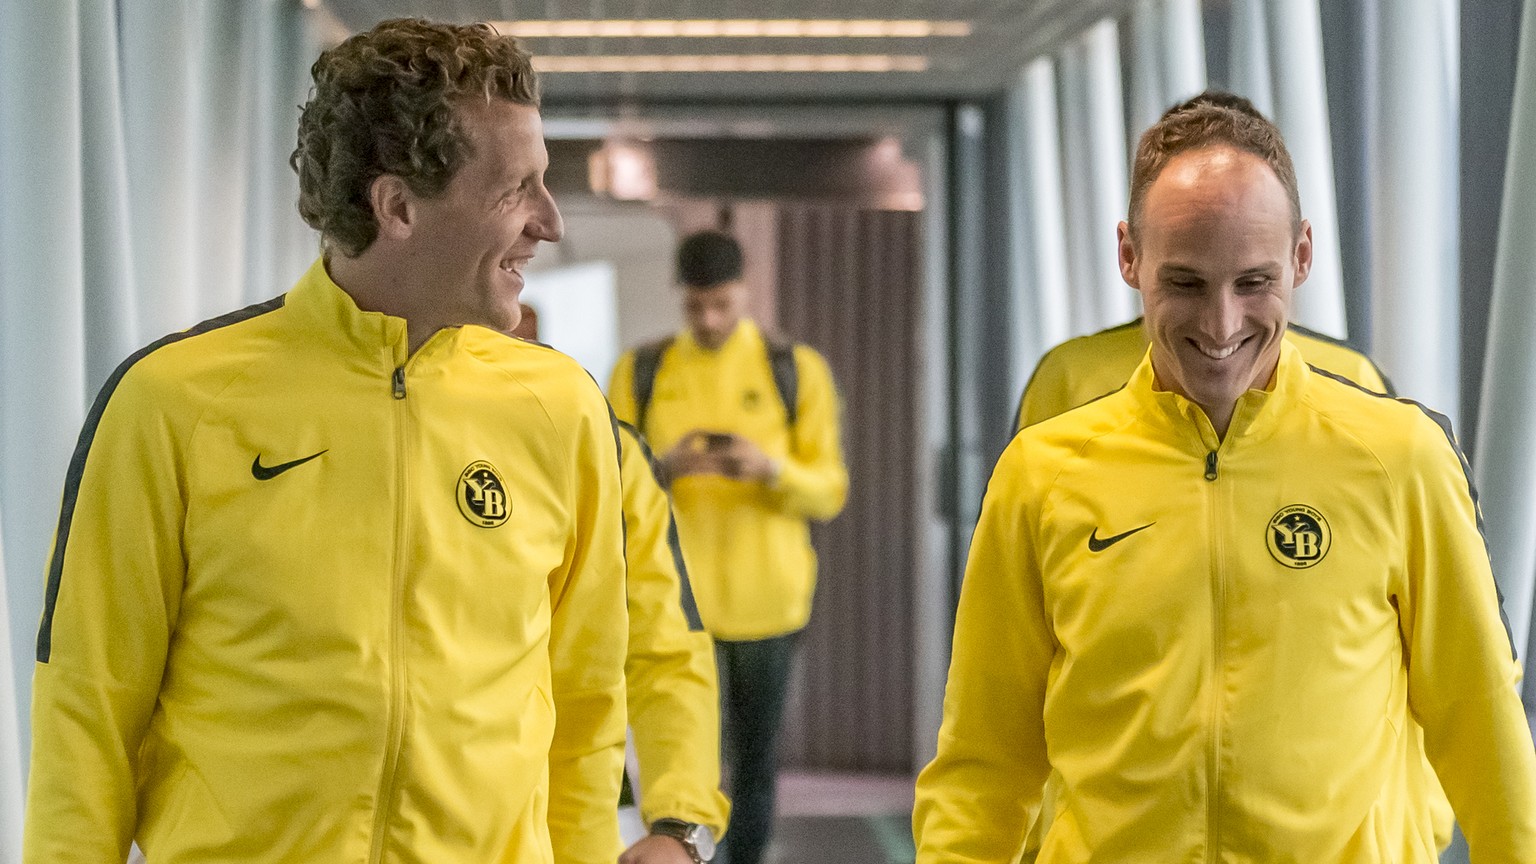 Young Boys players Marco Woelfli and Steve von Bergen, L-R, at the airport after the arrival in Turin for the UEFA Champions League group H matchday 2 soccer match between Juventus Turin and BSC Young ...